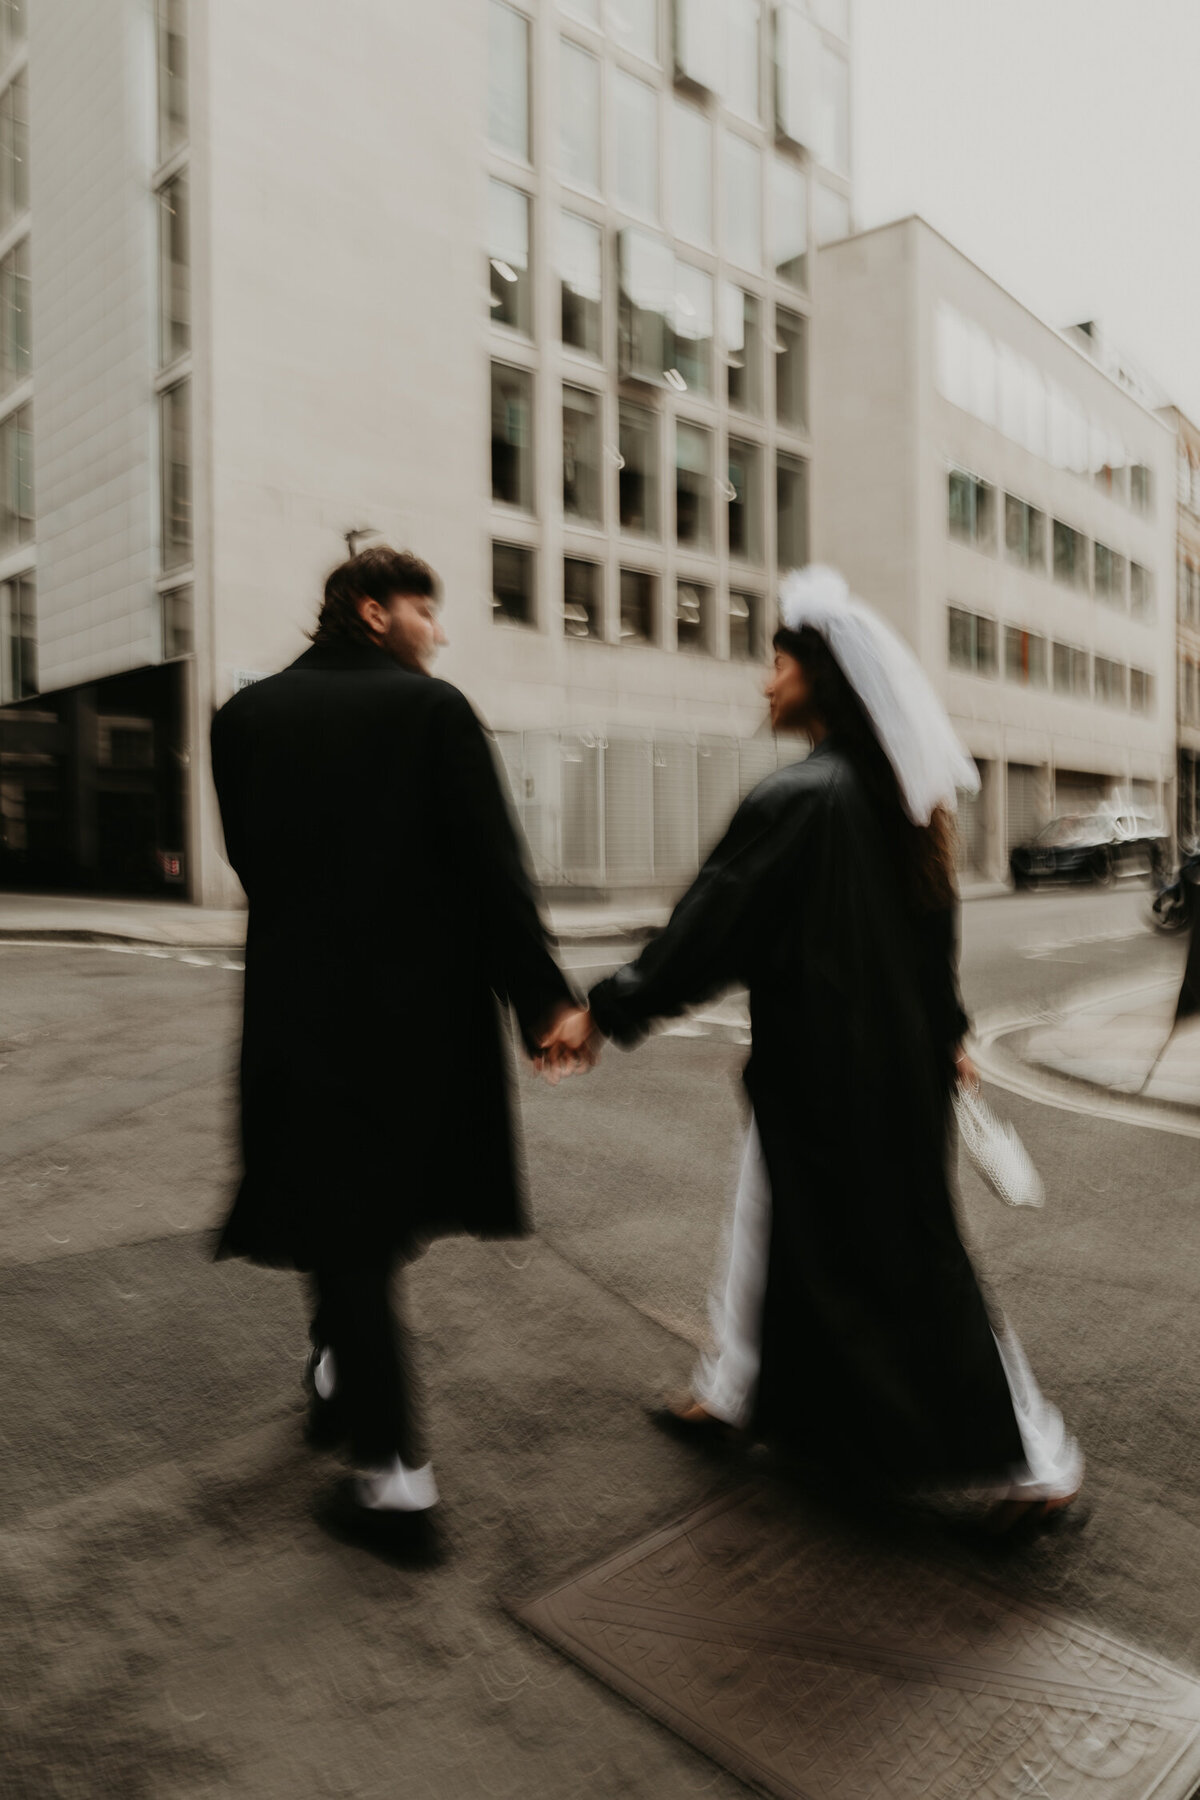 A married couple walk through the streets on London on their wedding day.